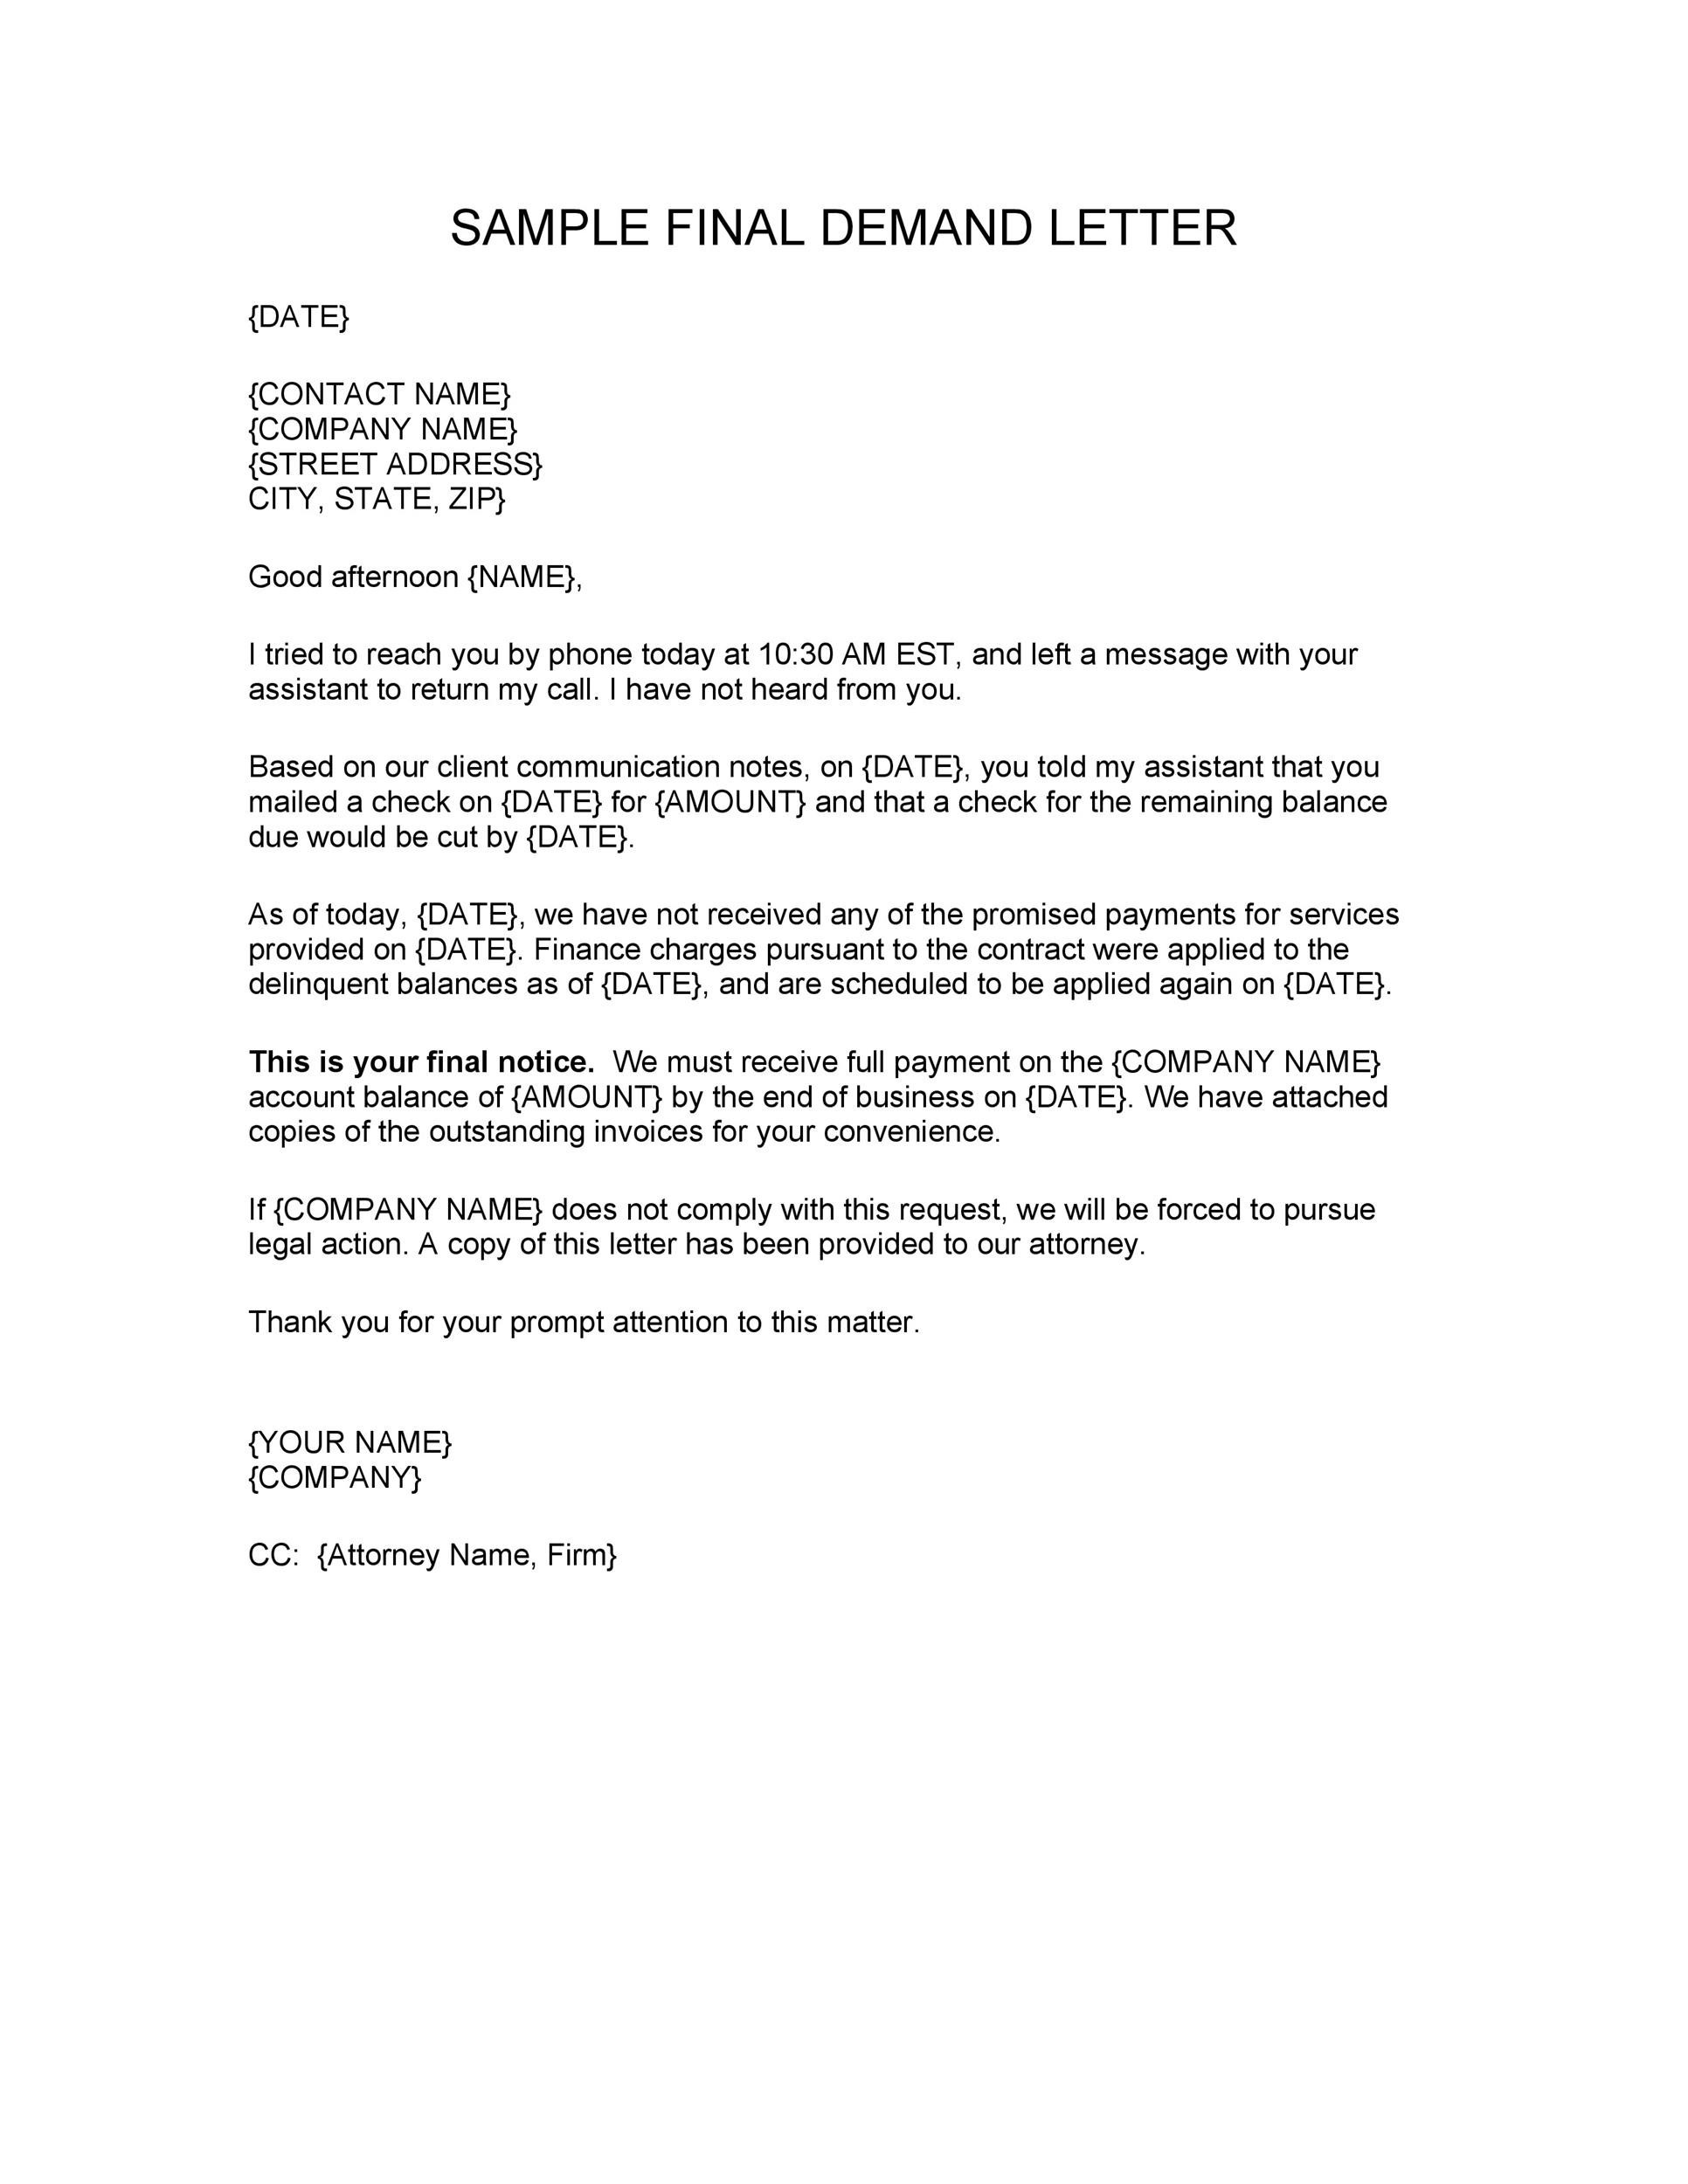 Sample Letter Of Demand from templatelab.com